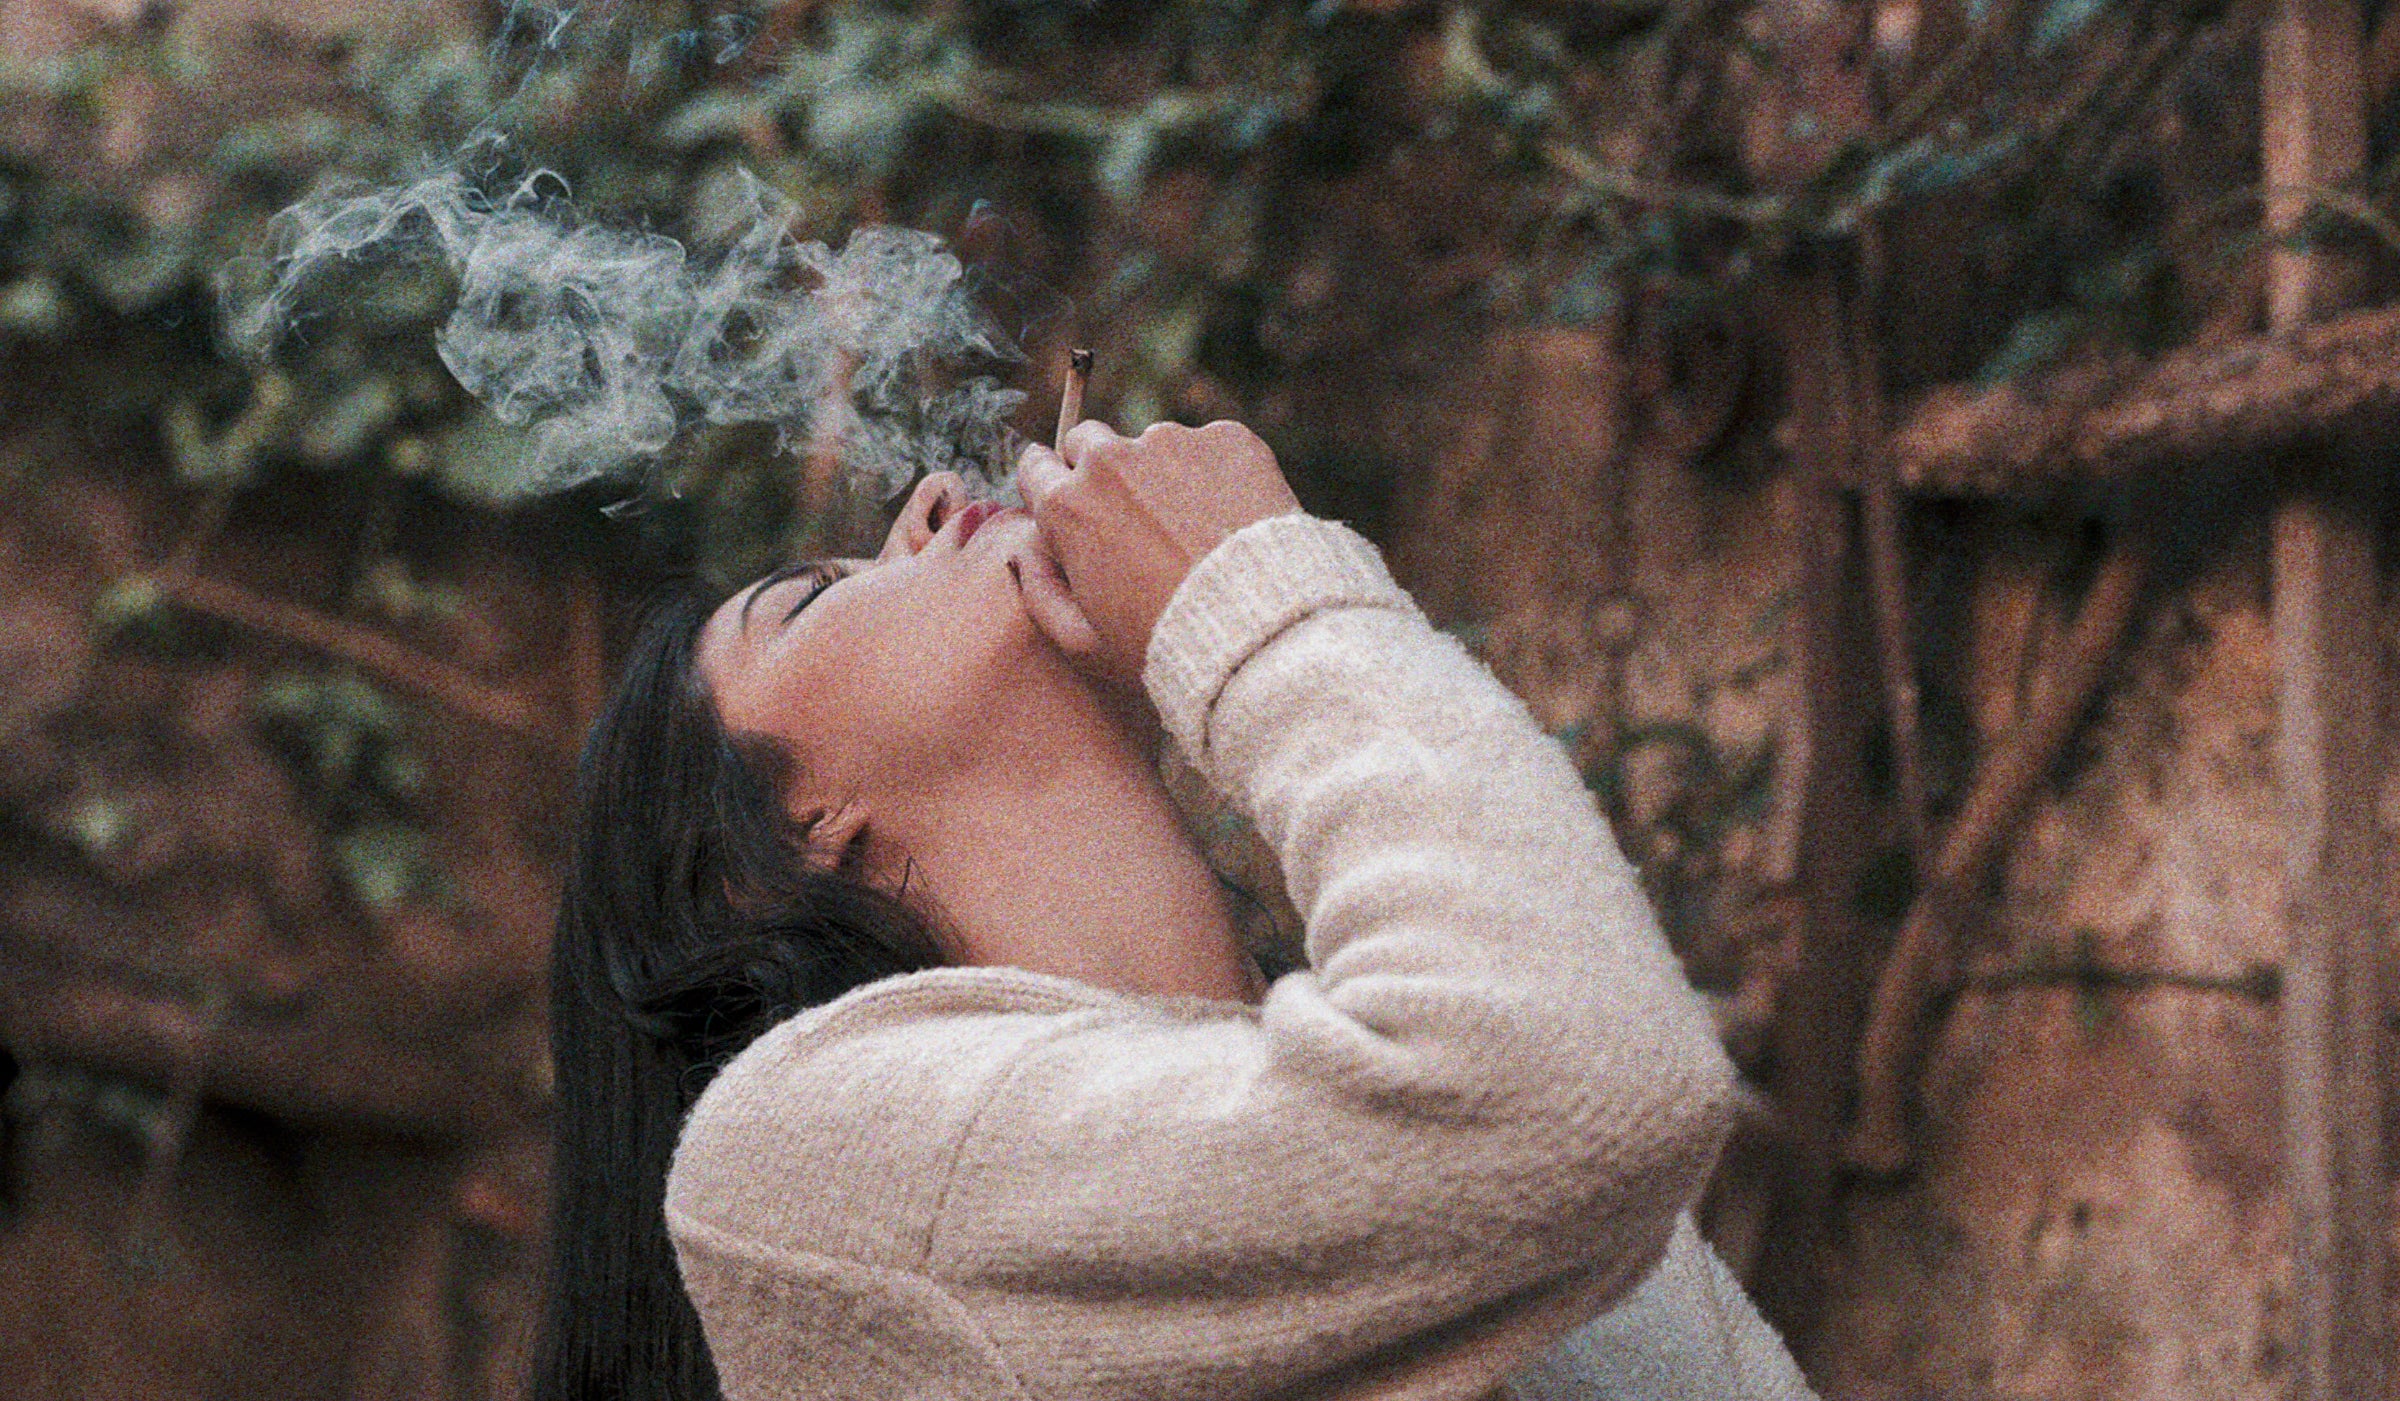 Relaxed vibes: A woman enjoying a cannabis pre-roll in a backyard oasis, surrounded by lush vines.